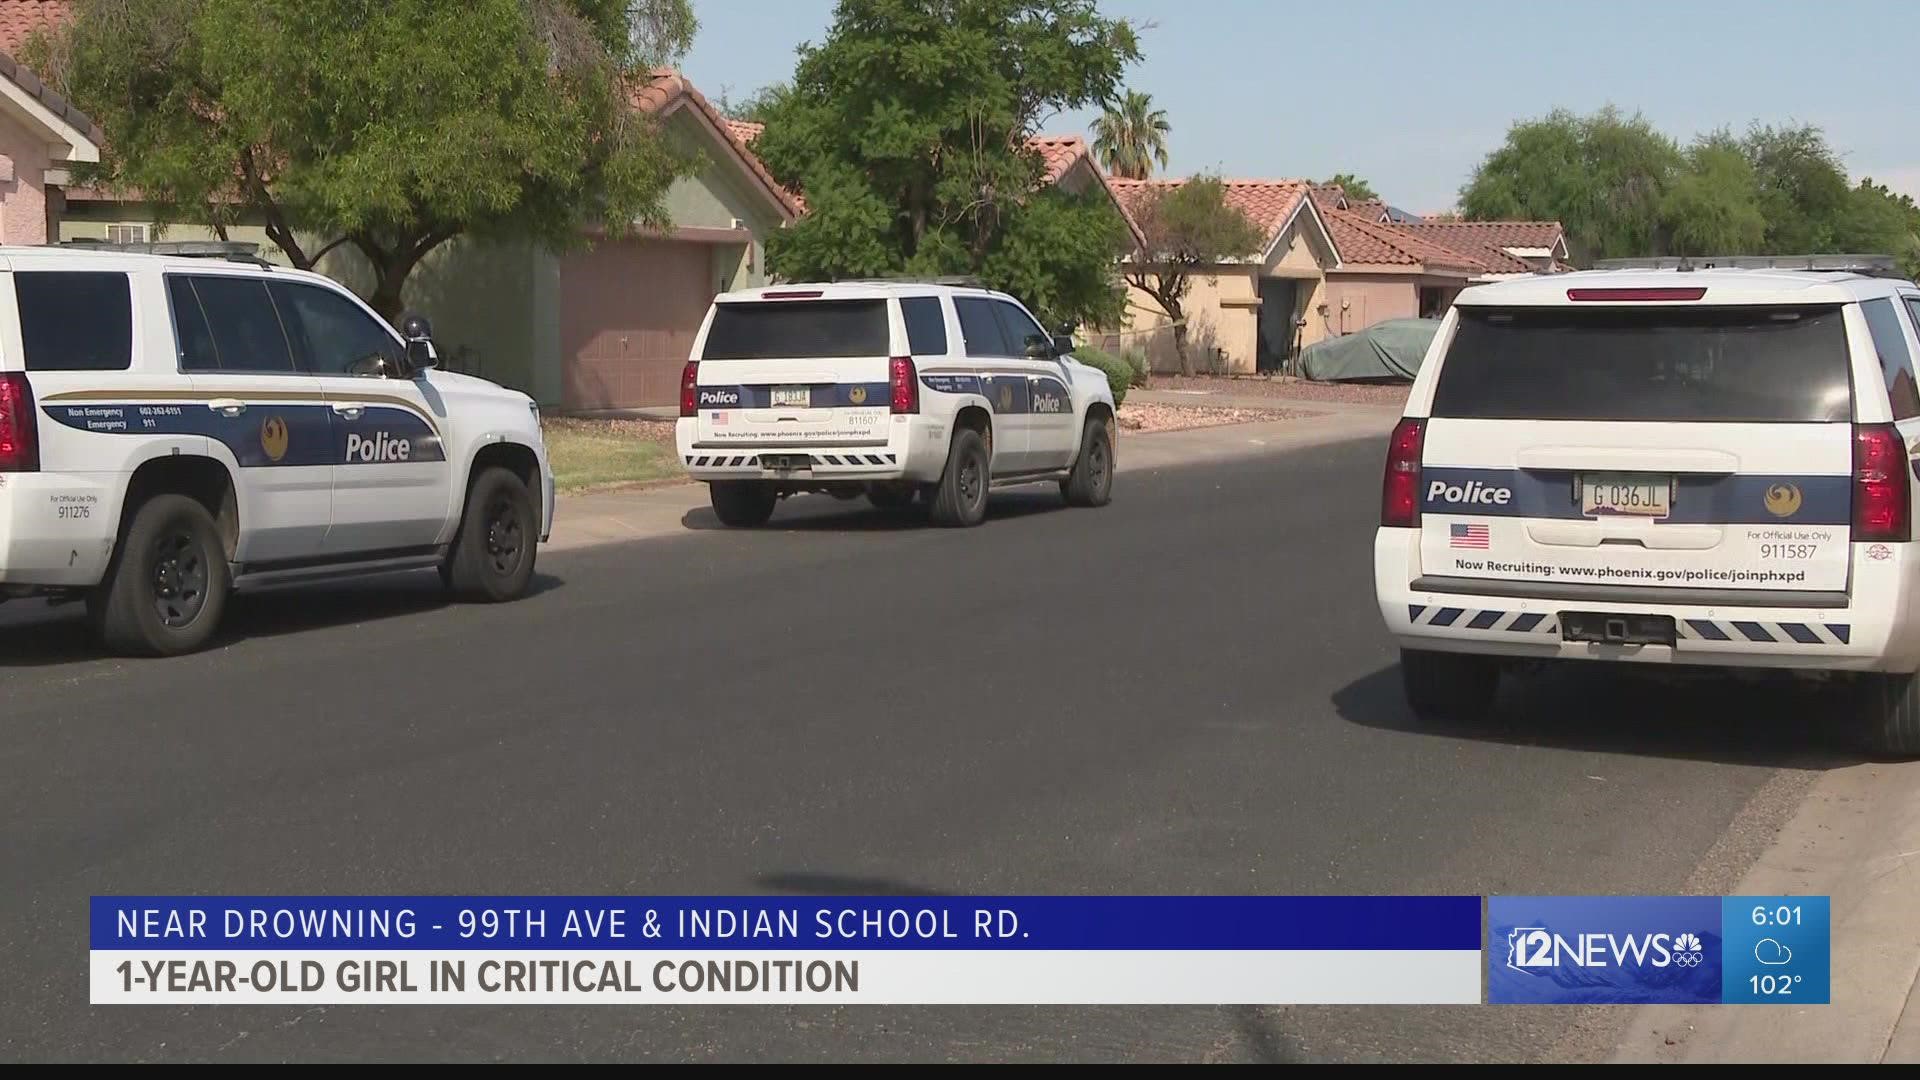 A 1-year-old girl is in extremely critical condition after a near-drowning at a West Phoenix home on Saturday afternoon.